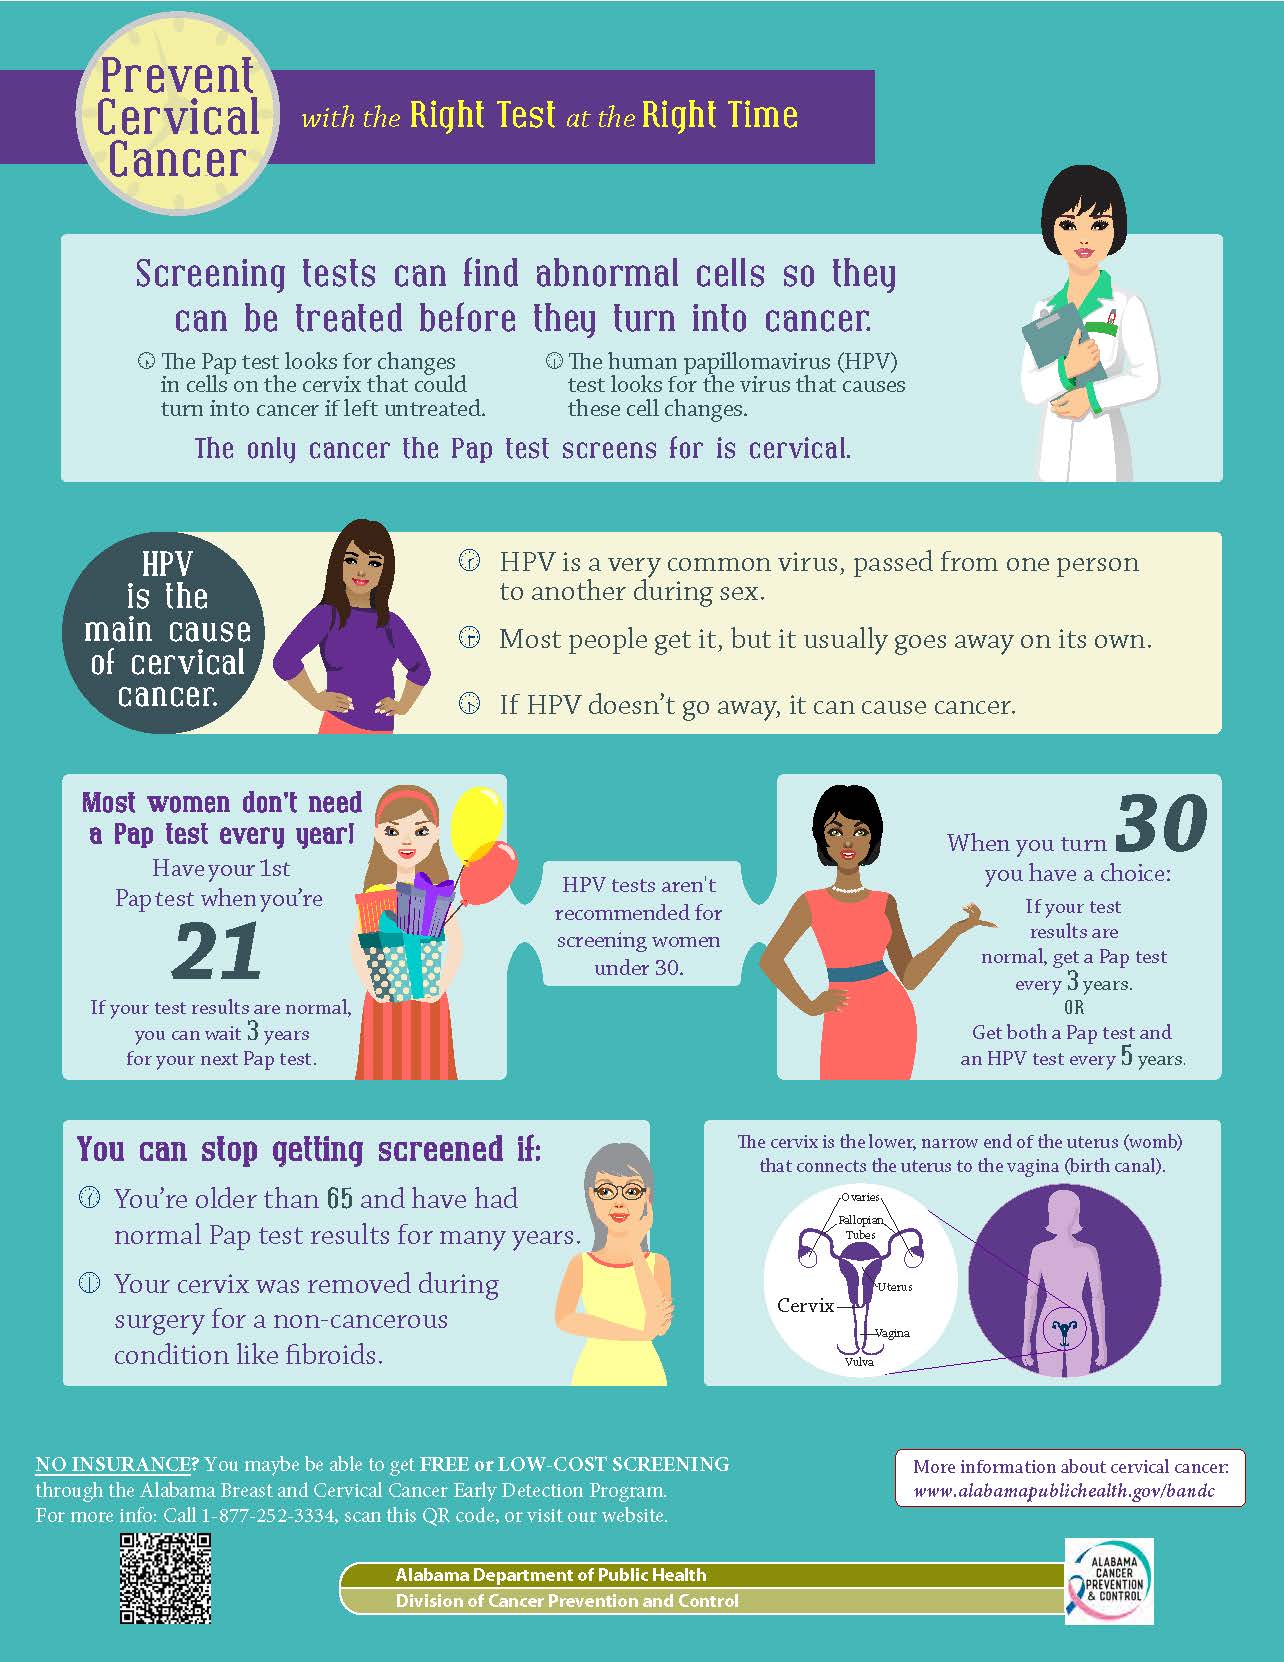 Prevent Cervical Cancer with the Right Test at the Right Time